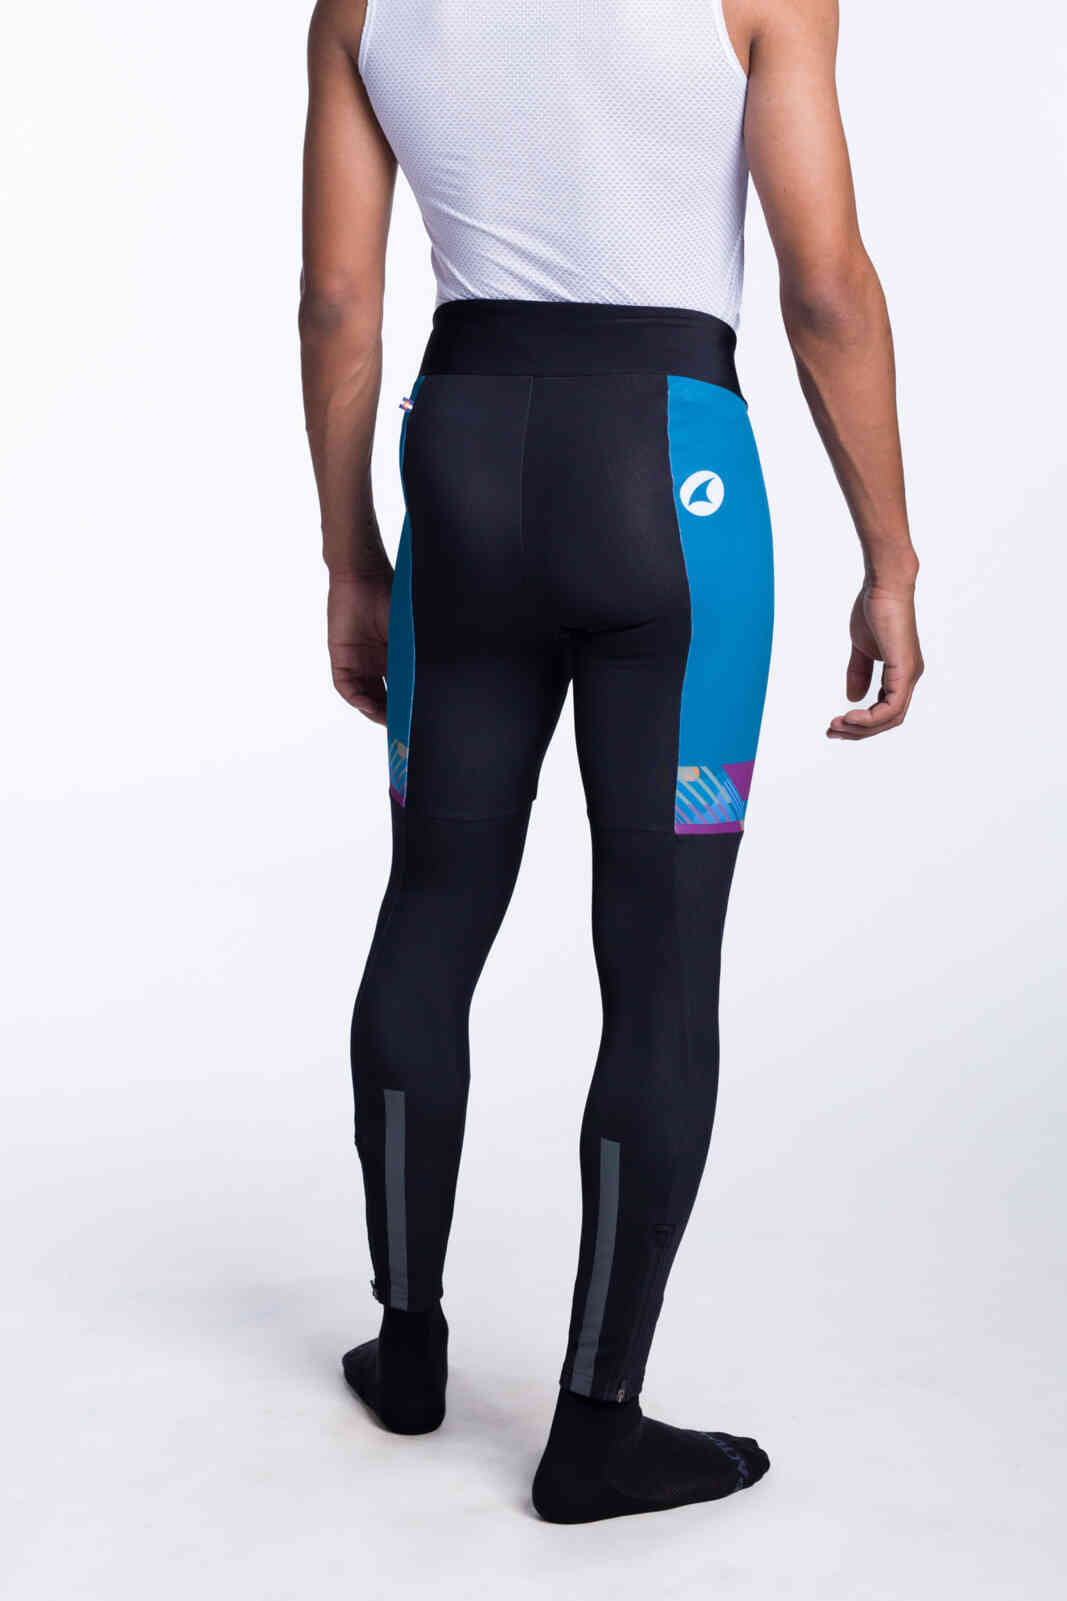 Women's Custom Thermal Cycling Tights, Alpine Pactimo